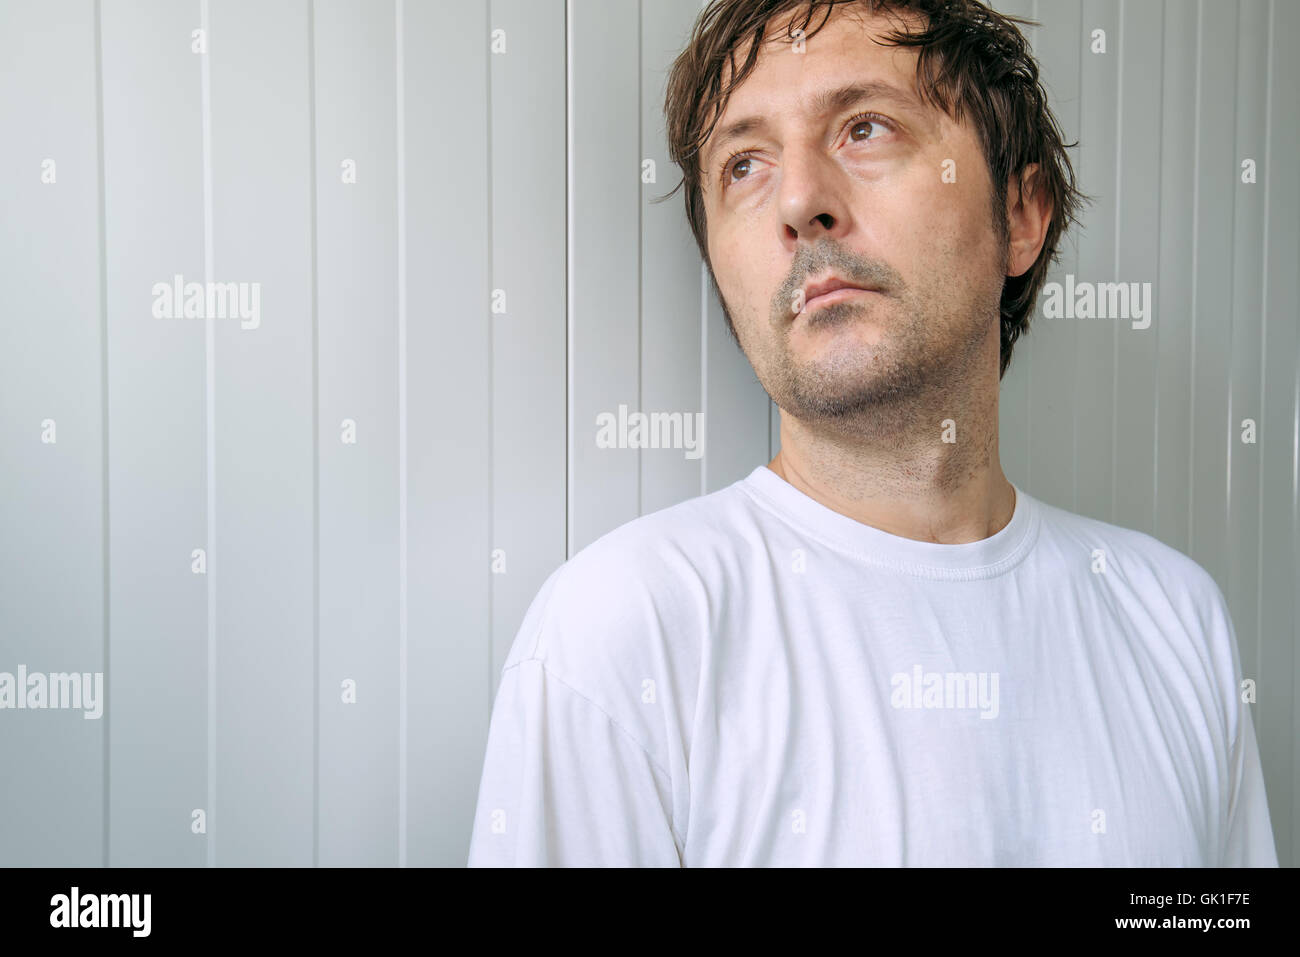 Concentrated pensive man looking up and thinking positive thoughts Stock Photo